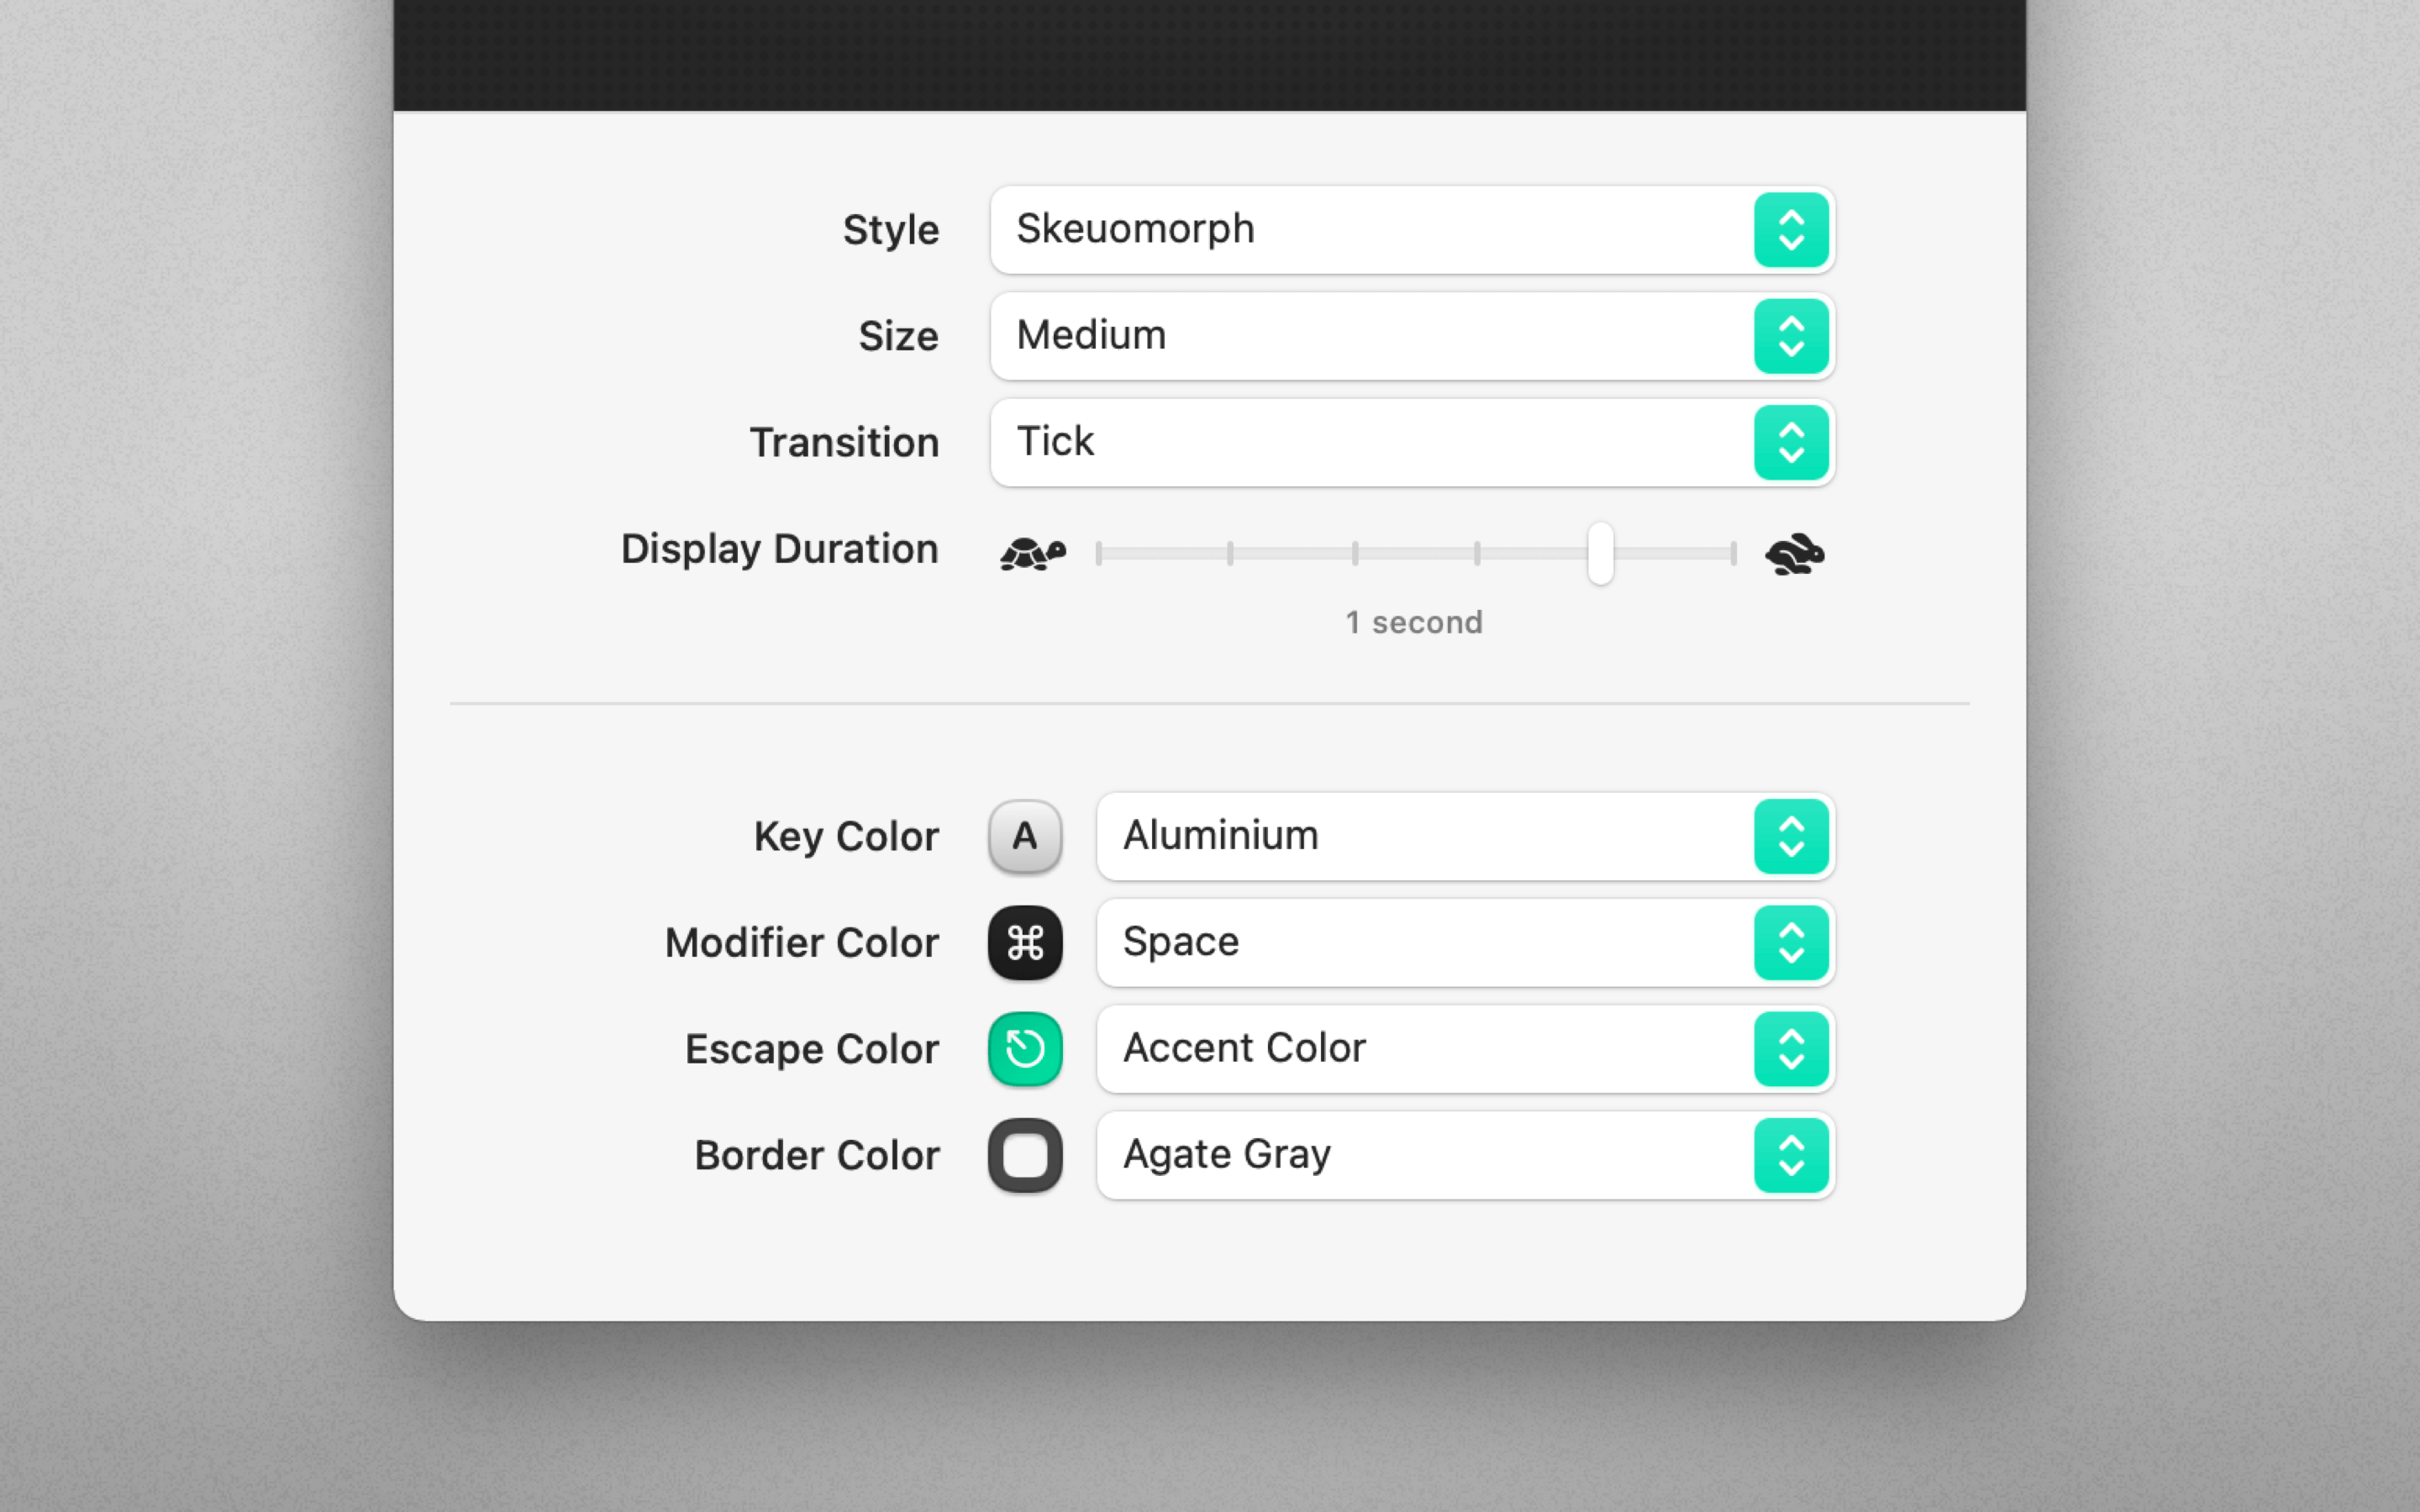 A close-up view of Keystroke Pro’s appearance settings, such as style, size, transition animations, and display duration.